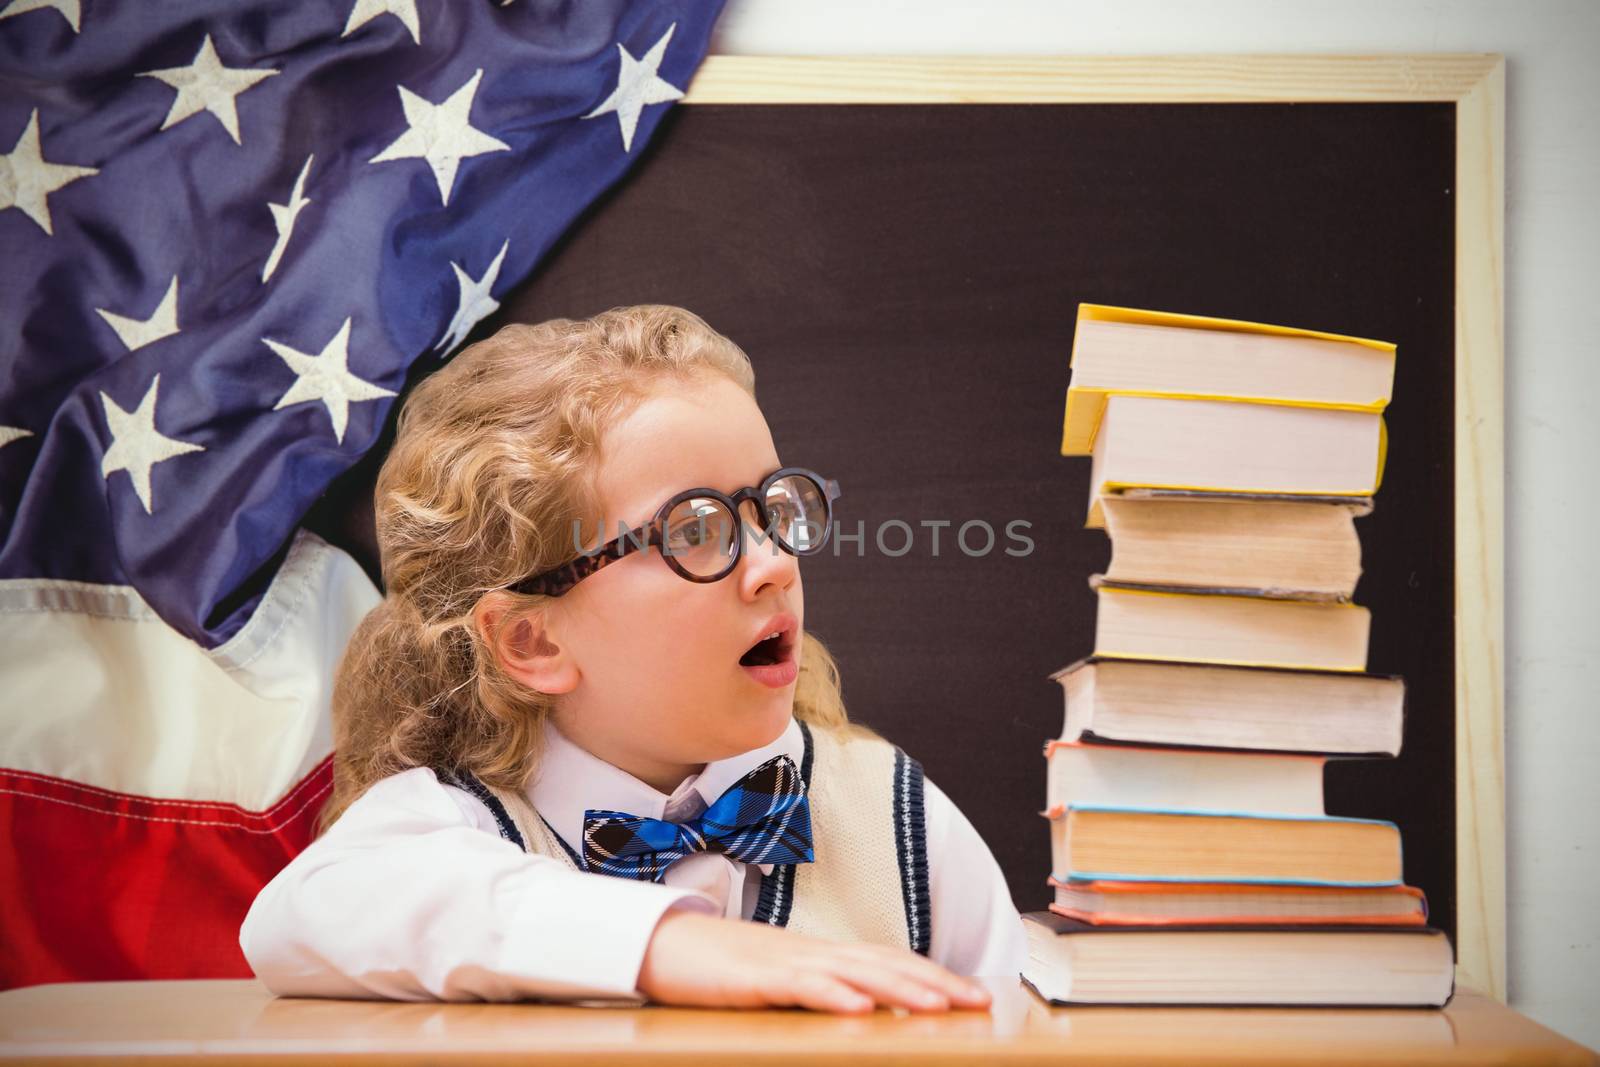 Surprise pupil looking at books against american flag on chalkboard